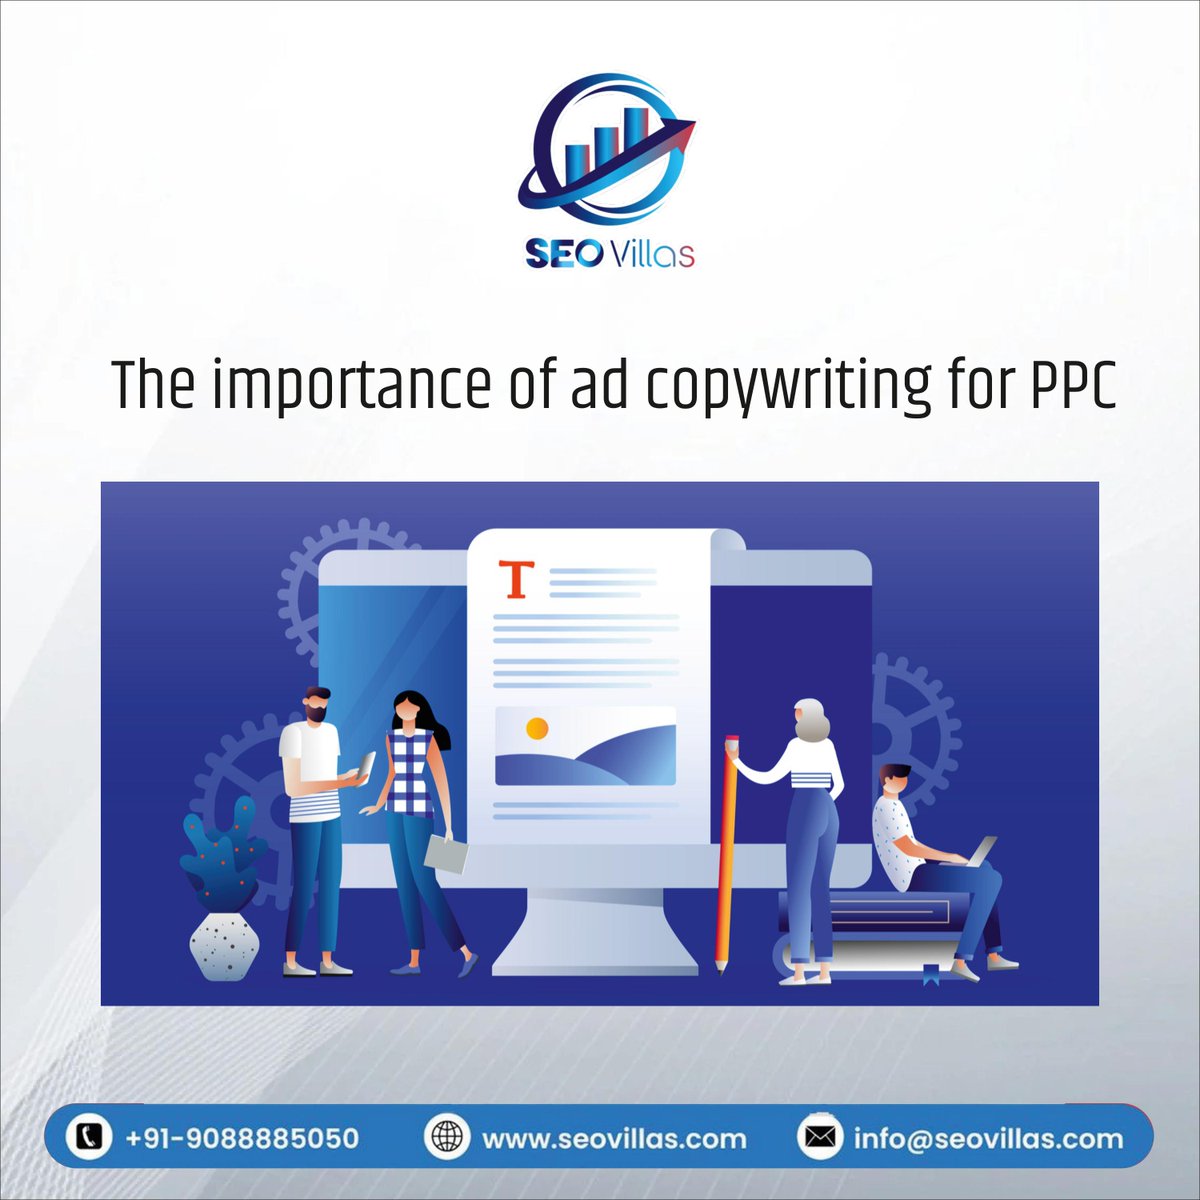 📢 Unlock the Power of #PPC with Stellar Ad Copy! ✨ At #SEOVillas Pvt. Ltd., we understand that persuasive ad copy is the 🔑 to unlocking higher ROI in your PPC campaigns. 💰 Let our expert team of copywriter's craft compelling, click-worthy ads for your business! #AdCopywriting